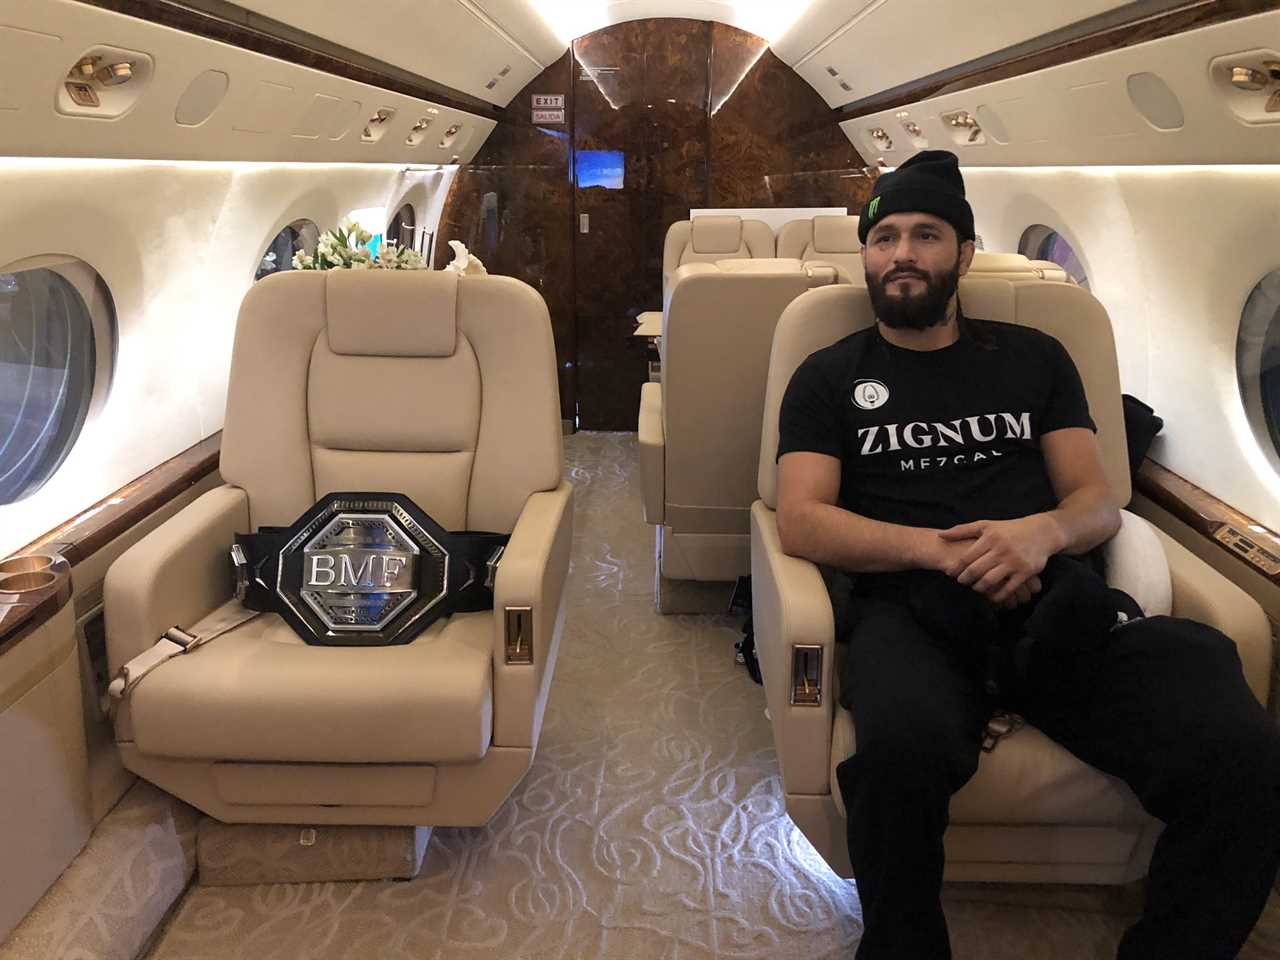 Jorge Masvidal has gone from fighting for $500 in Kimbo Slices’ BACKYARD, to promoting his own MMA fights and becoming a UFC star.